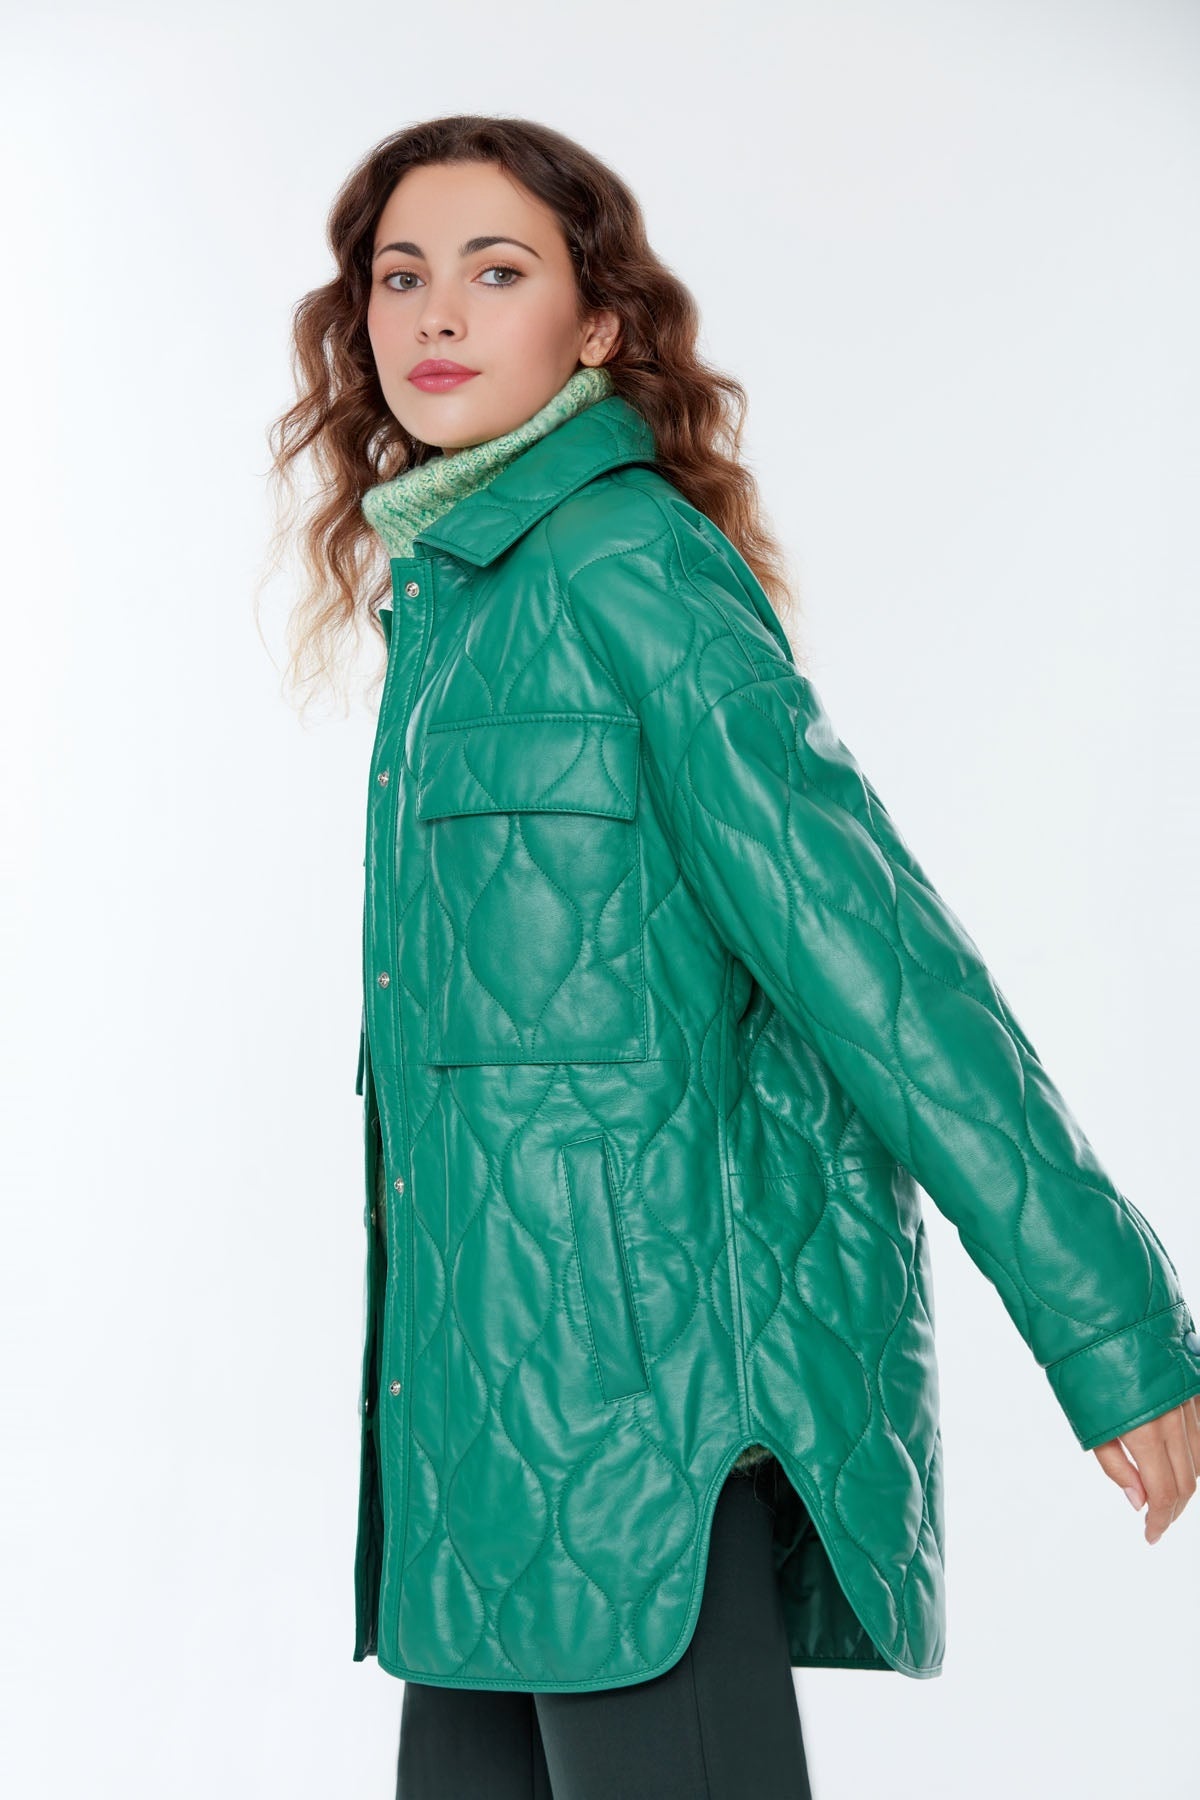 Miracle Women's Green Long Leather Coat